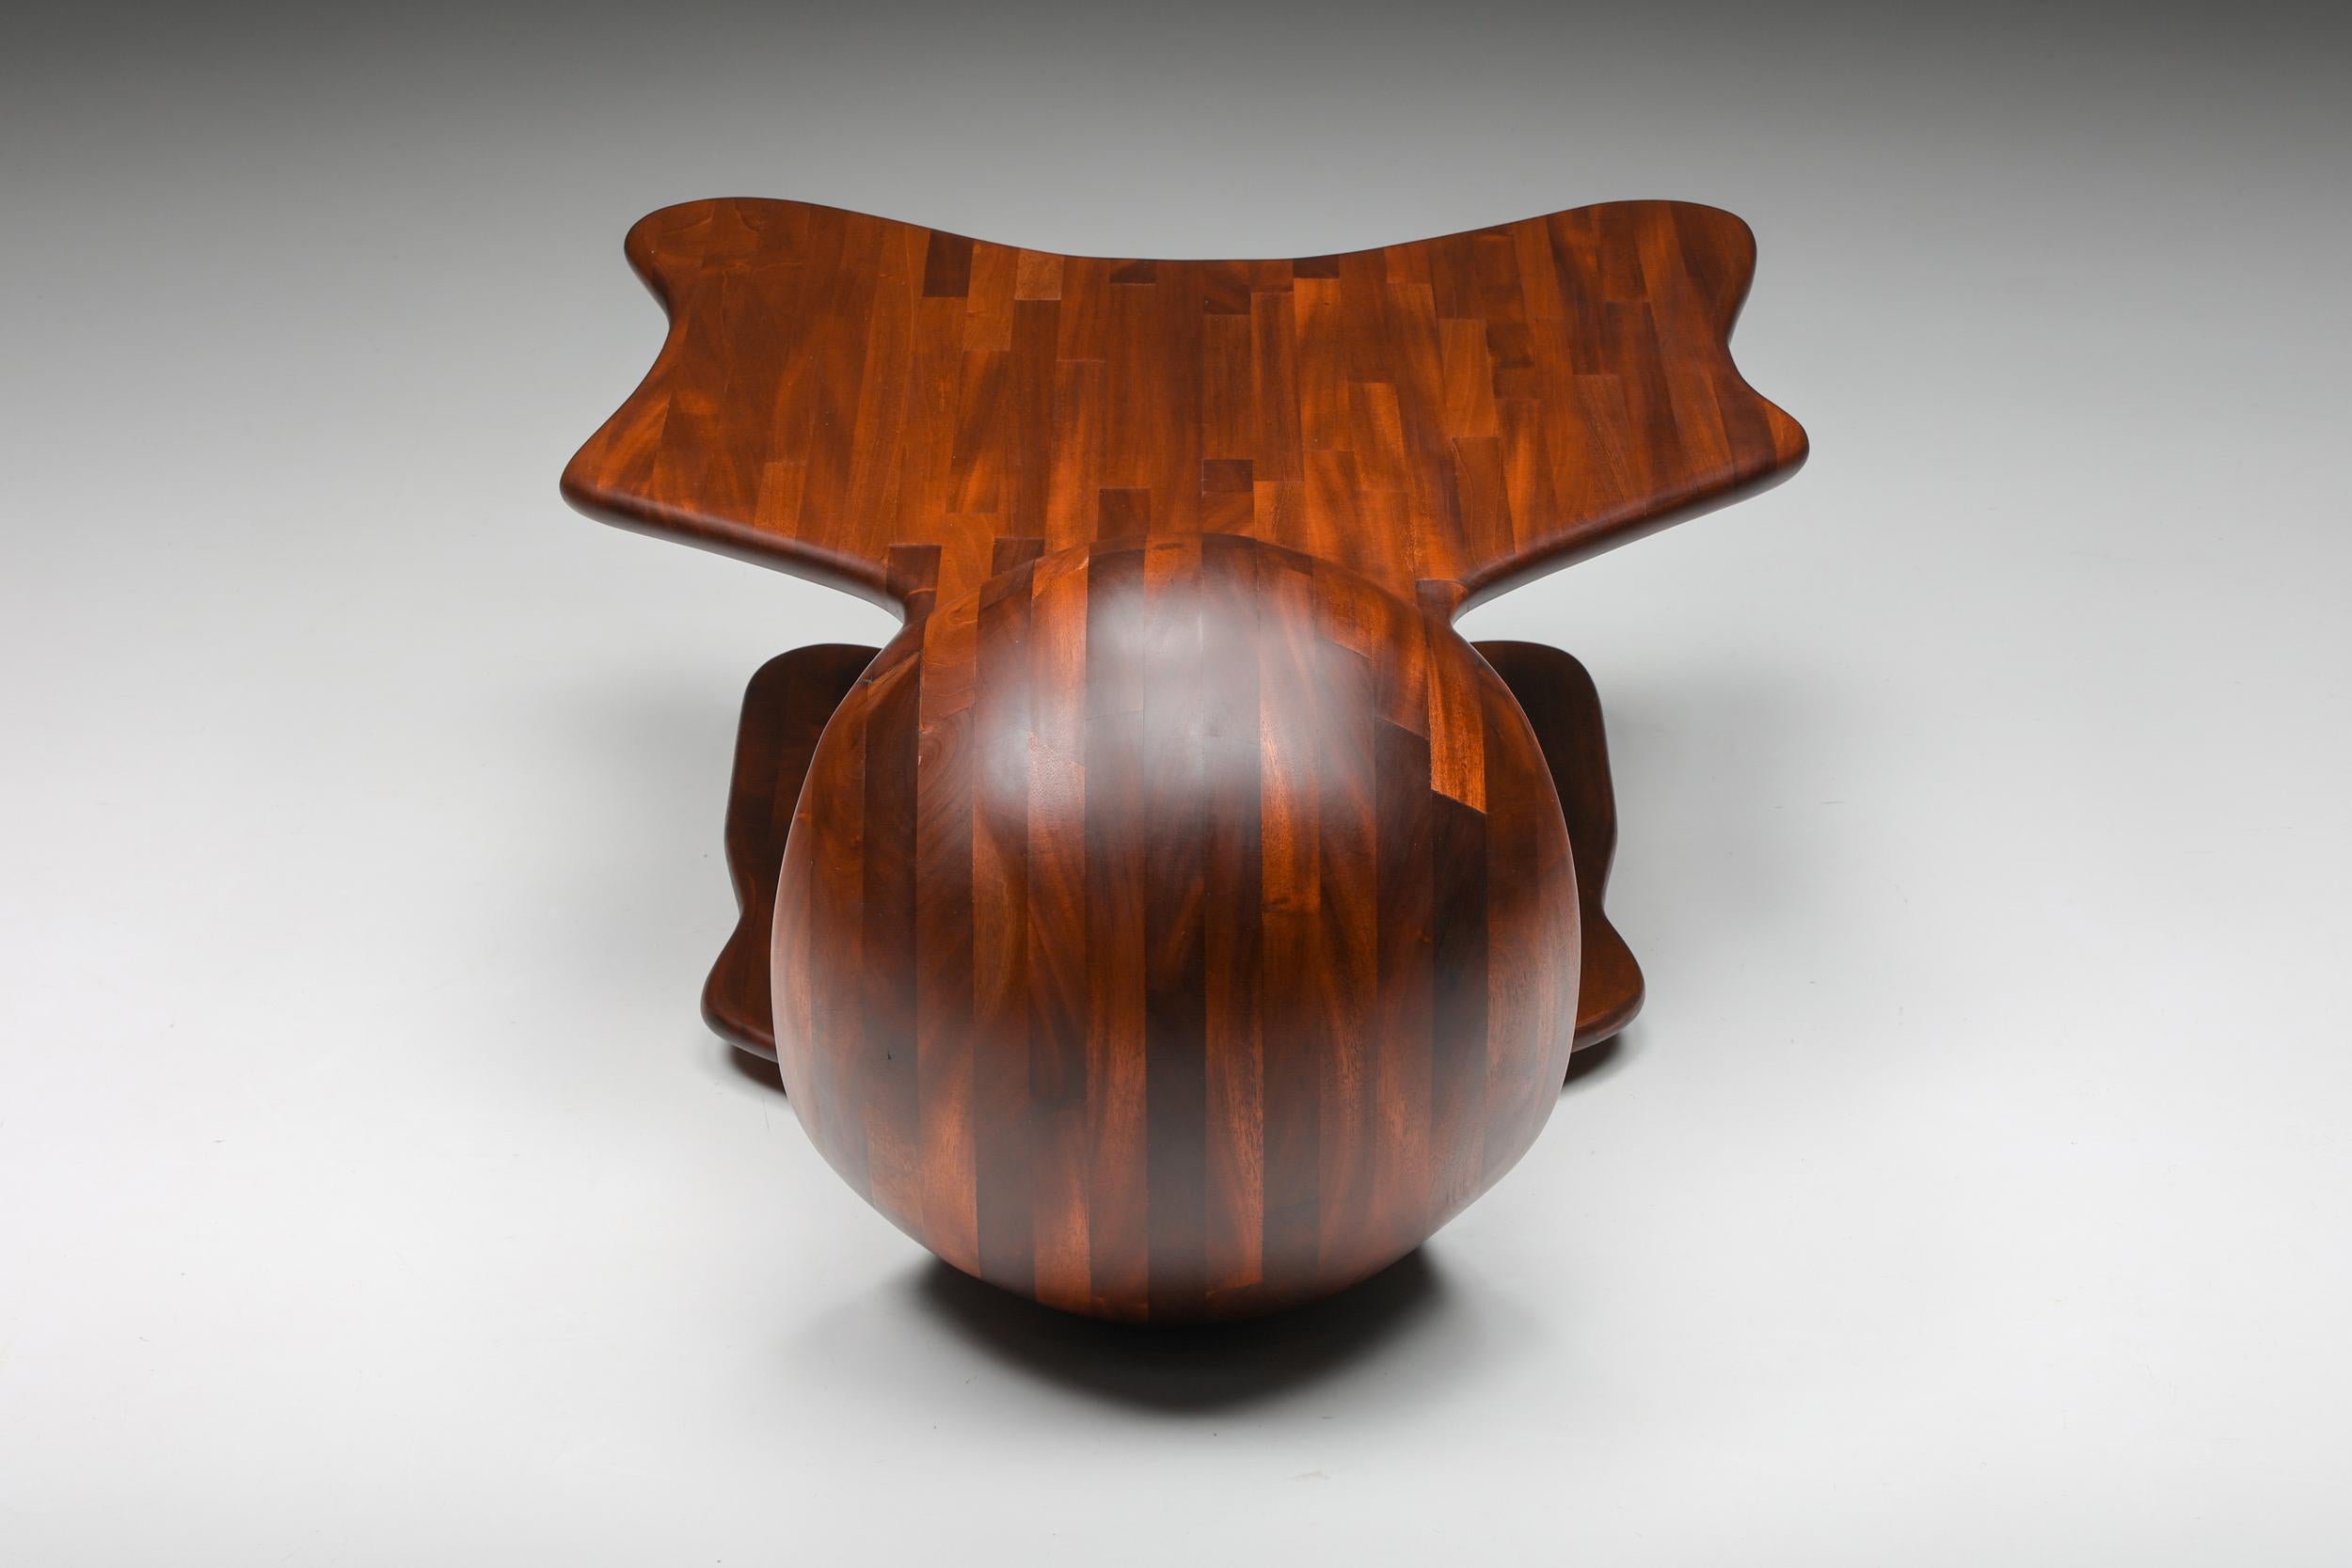 Modern Era coffee table; Studio Craft; Wendell Castle; USA: 1970's

Wendell Castle style freeform organic coffee table, studio craft, USA, 1970s. A Two-tier coffee table in dark wood, a protagonist piece of American Craft-based postwar art and